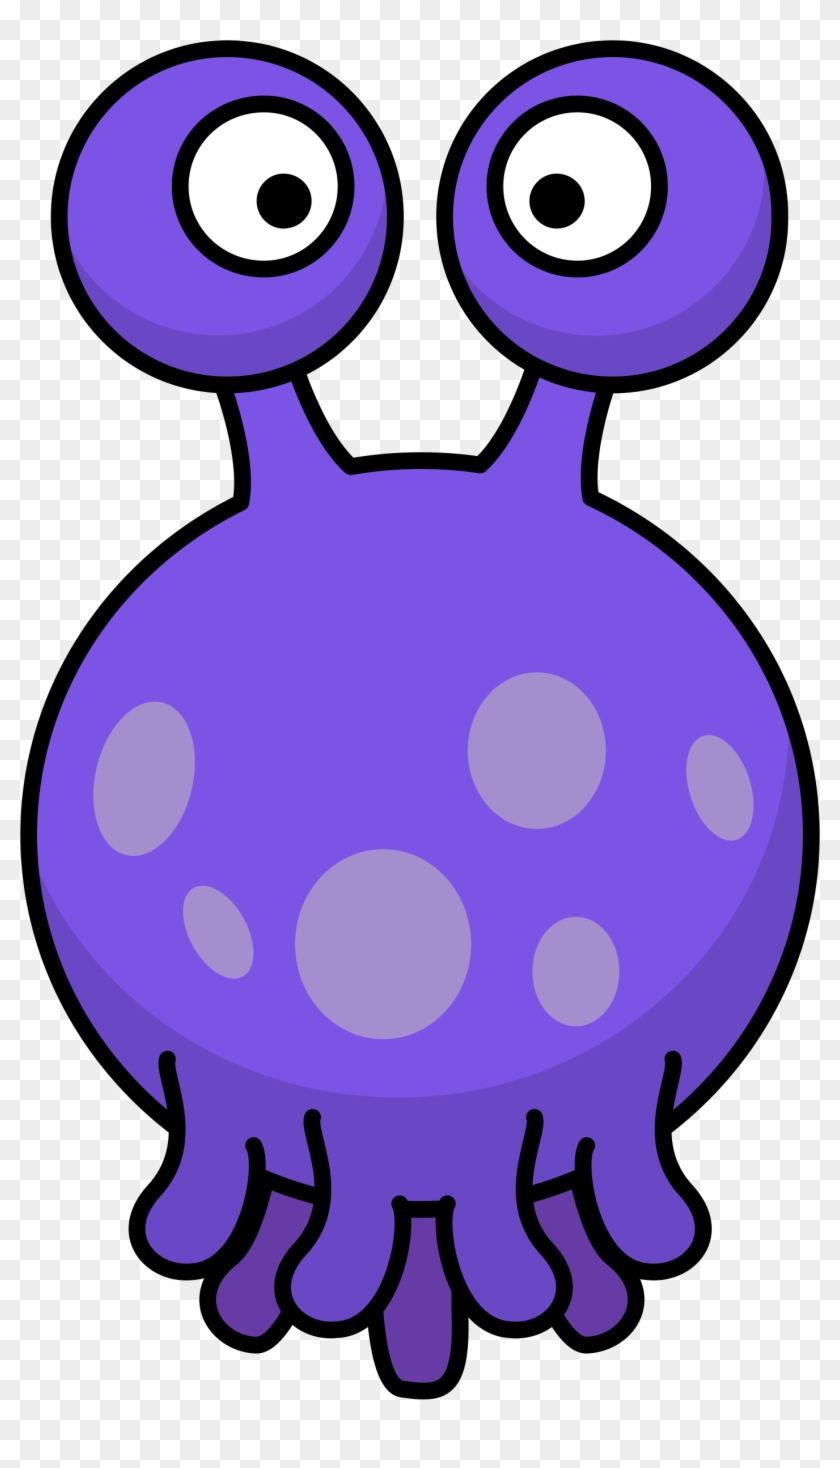 Clipart Floating Silly Alien With Tentacles Png - มนุษย์ ต่าง ดาว การ์ตูน #127718